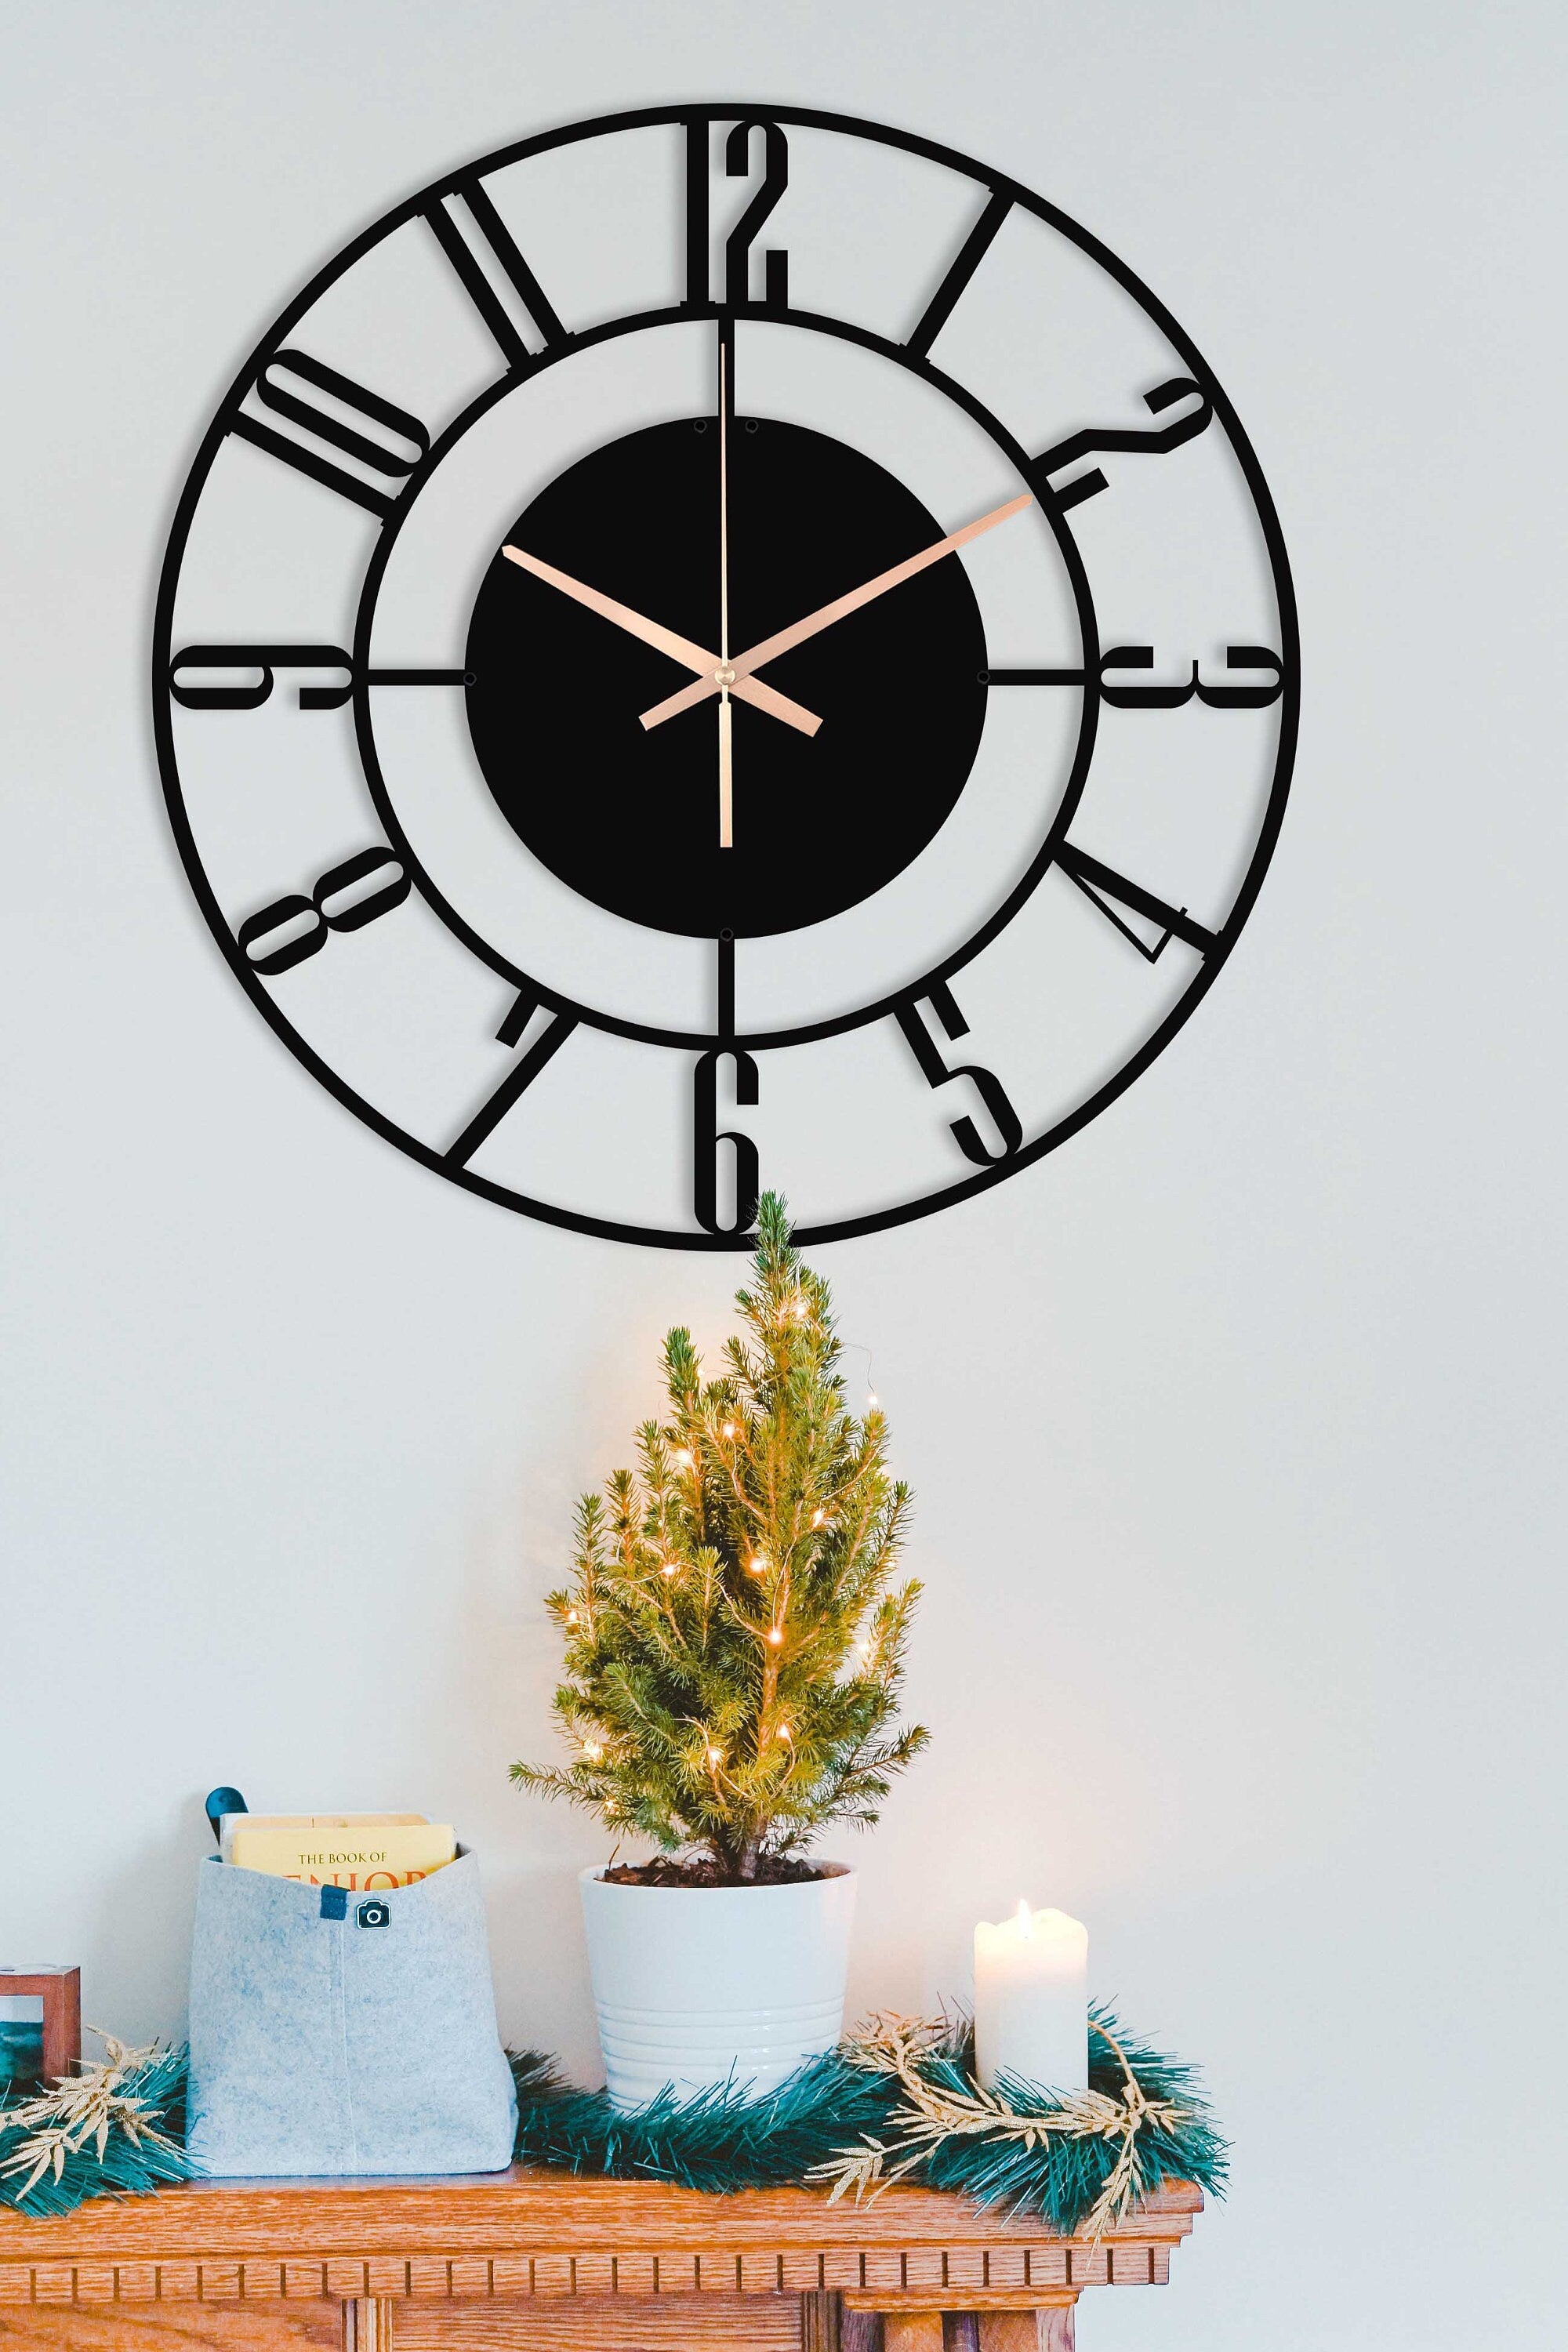 Unique Wall Clock, New Home Gift, Small Wall Clock, Silent Wall Clock, Oversized Wall Clock, Decorative Clocks For Wall, Laser Cut Clock